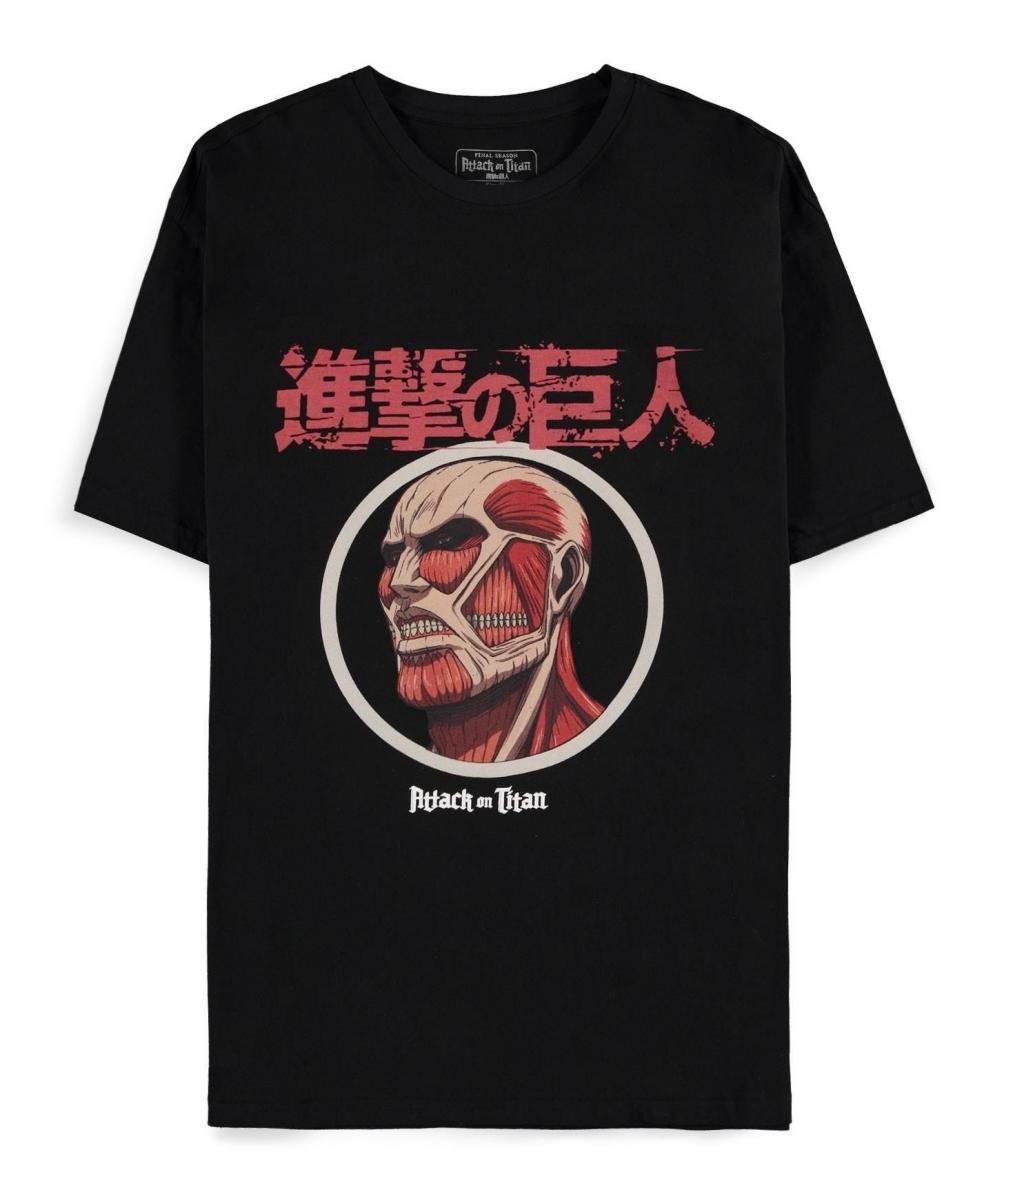 ATTACK ON TITAN - Colossus Titan - T-Shirt Homme (S)